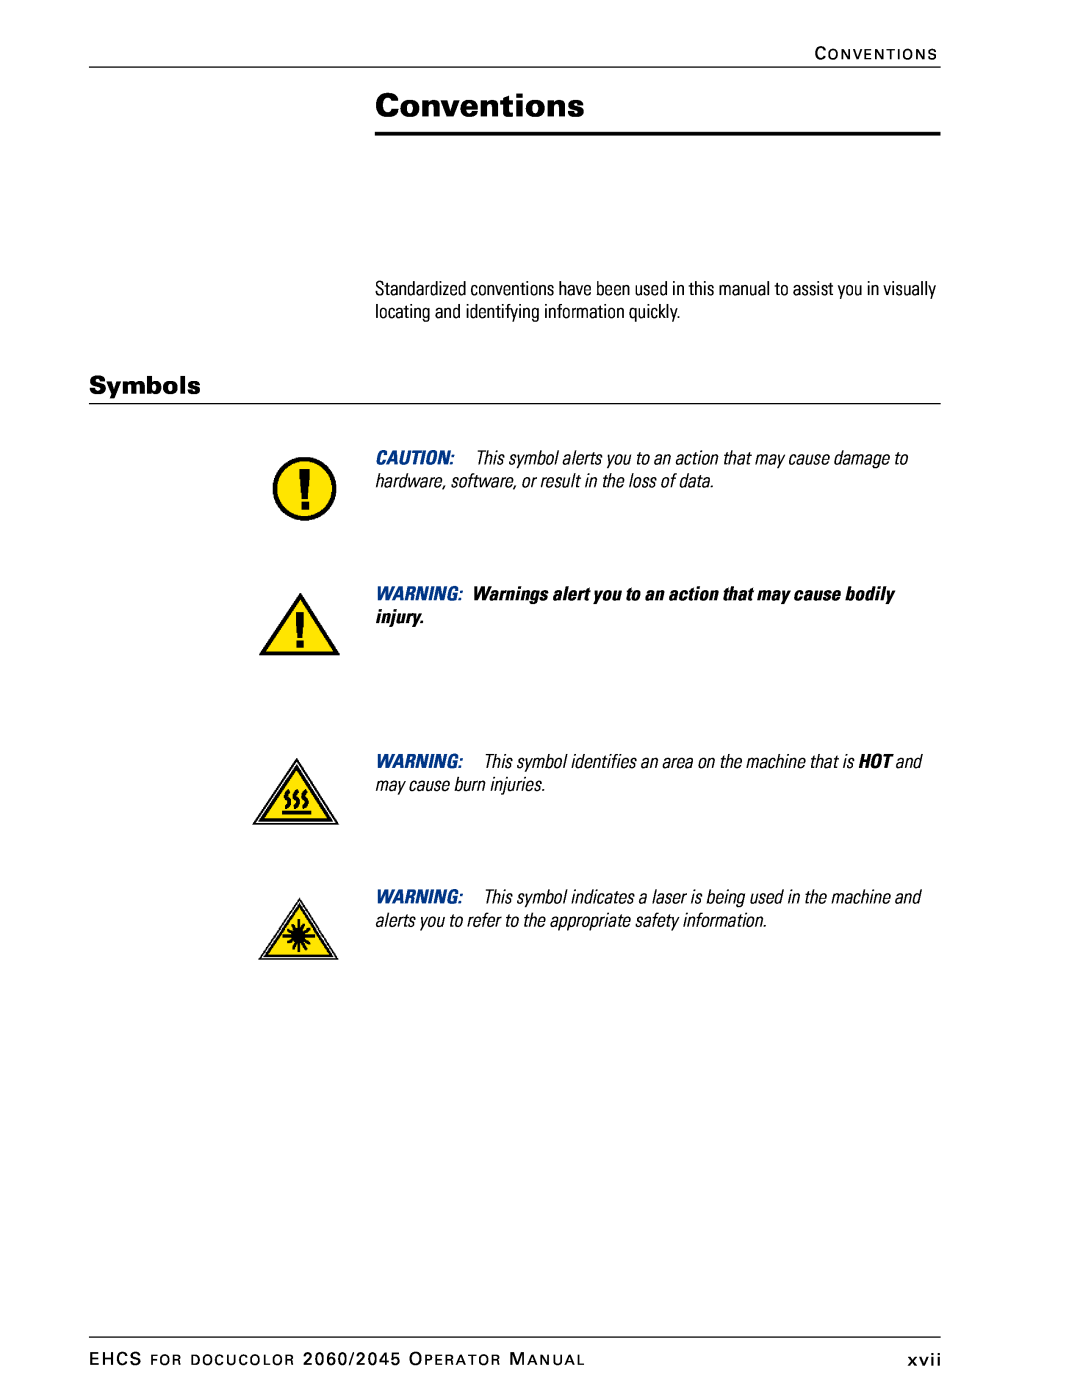 Xerox 2045 manual Conventions, Symbols, WARNING Warnings alert you to an action that may cause bodily injury 